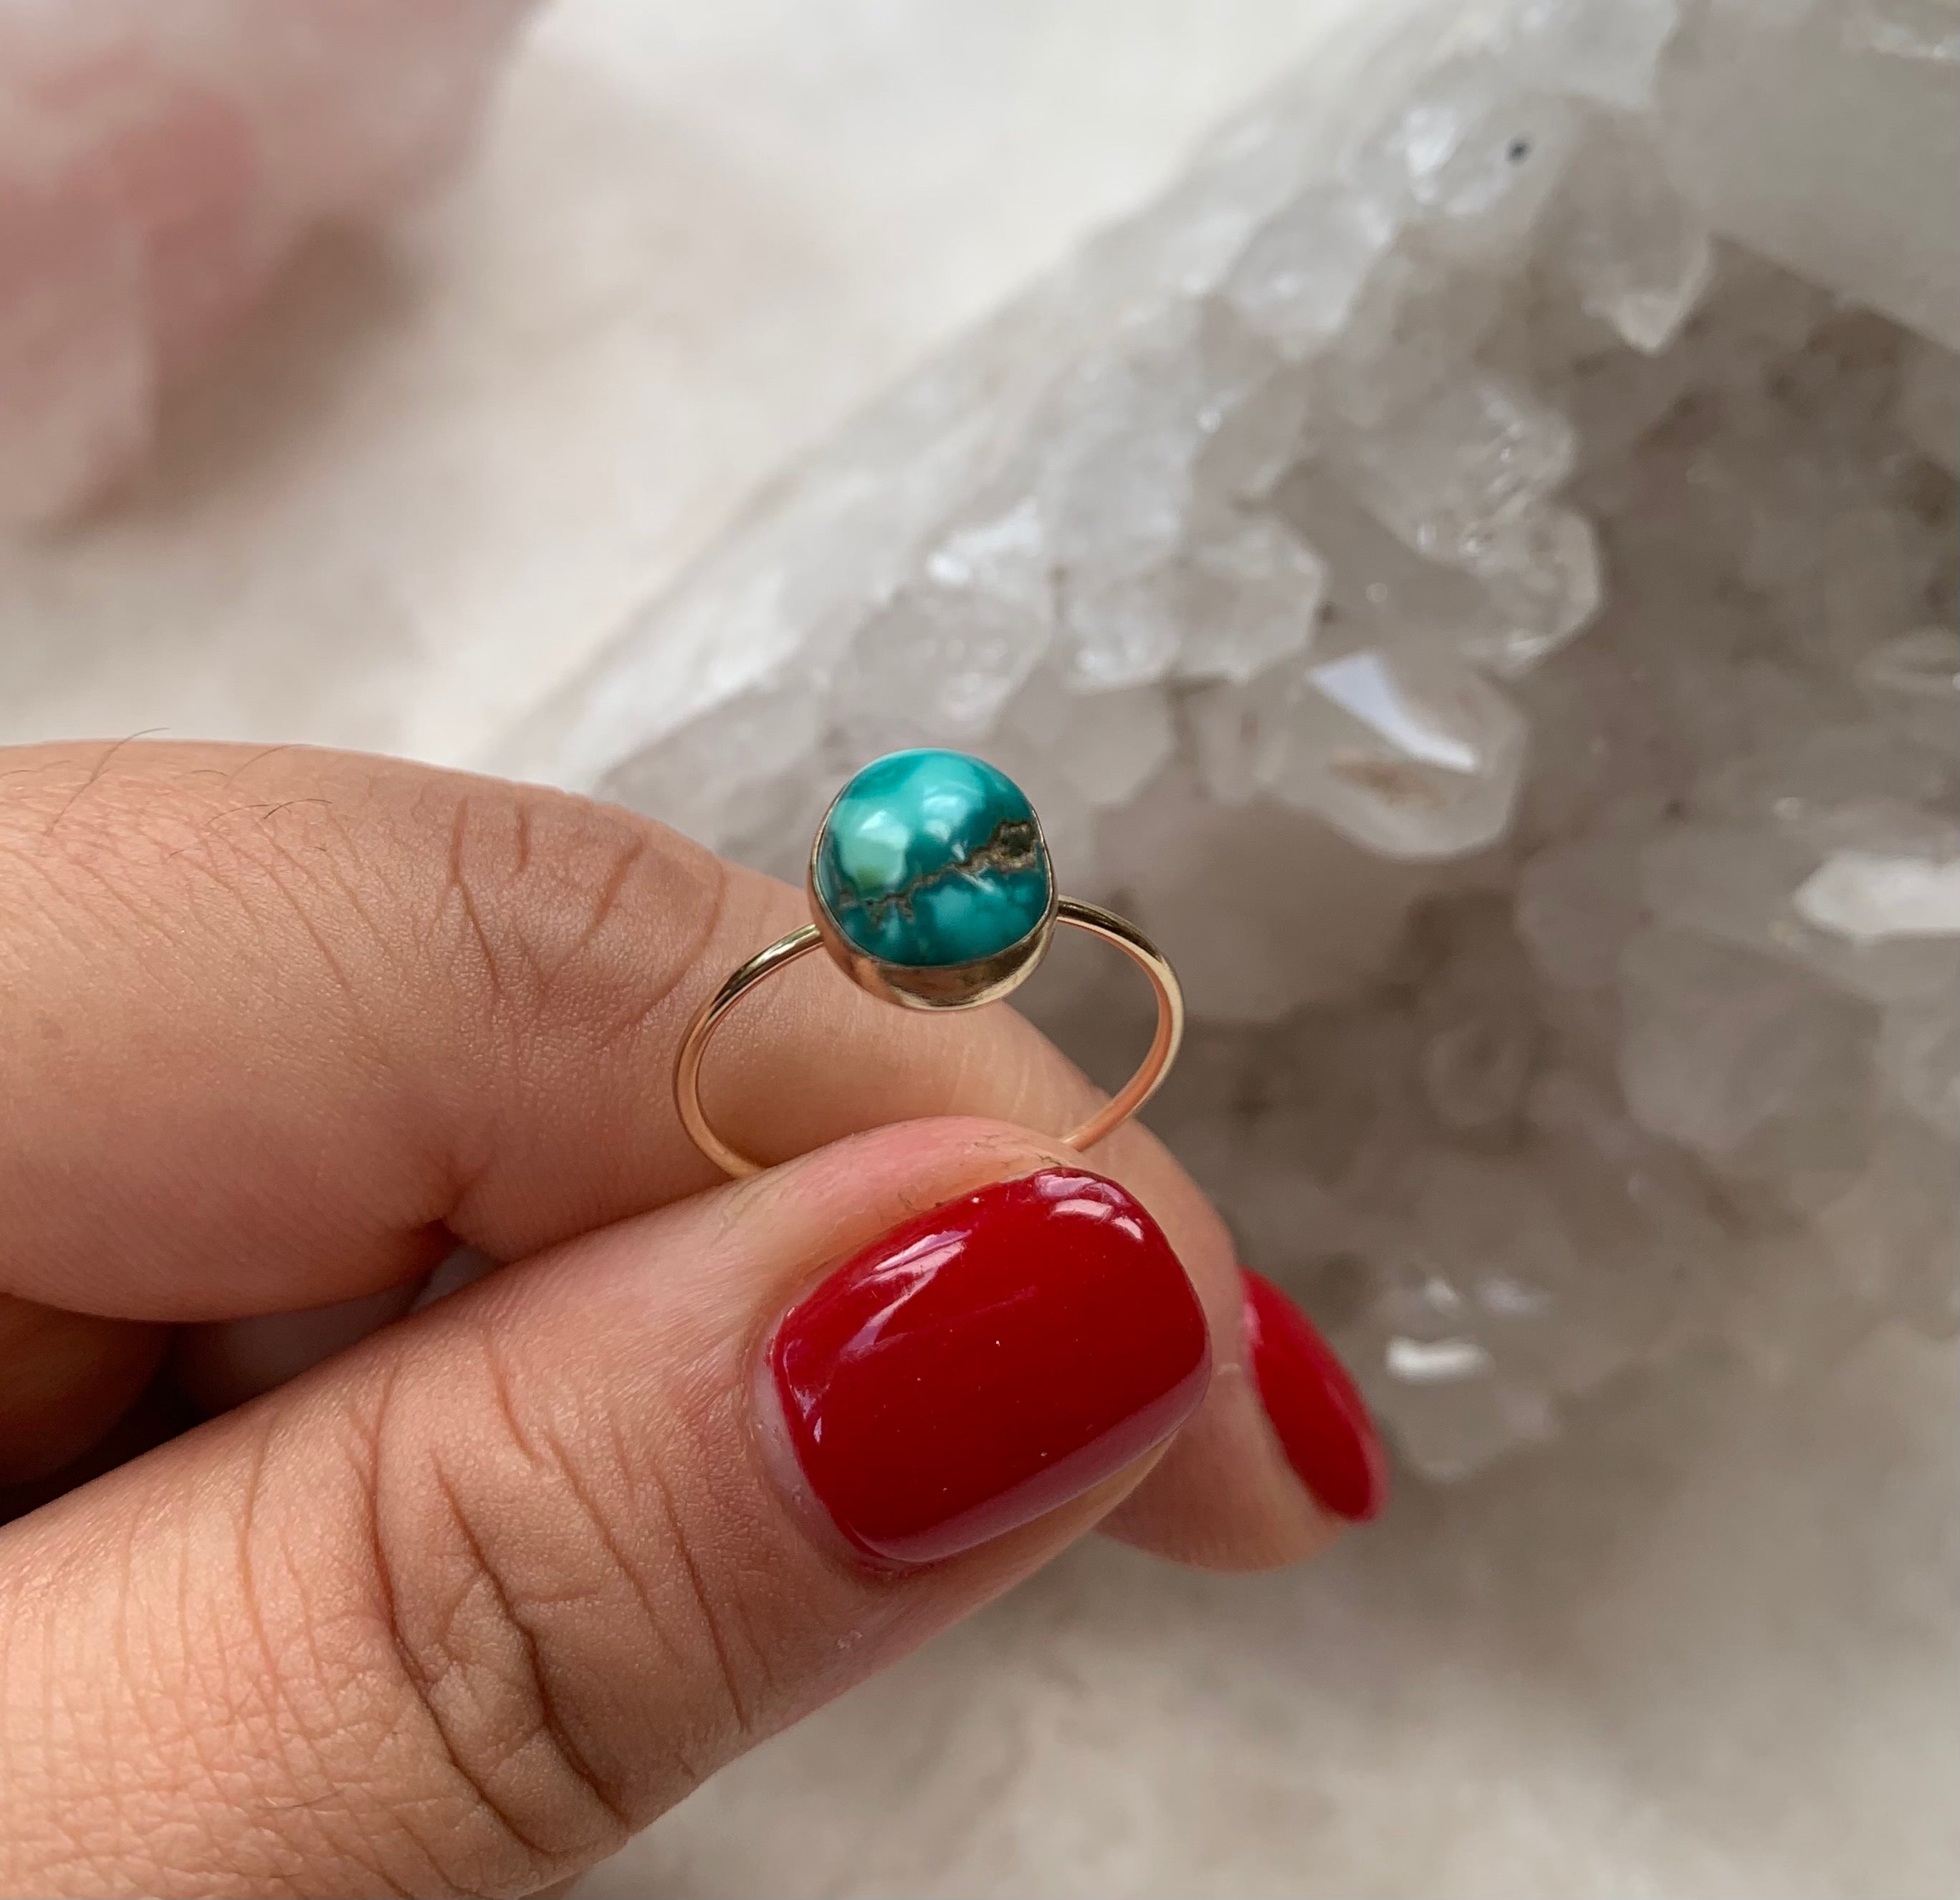 Gold Turquoise Solitaire ring. Size 7.15